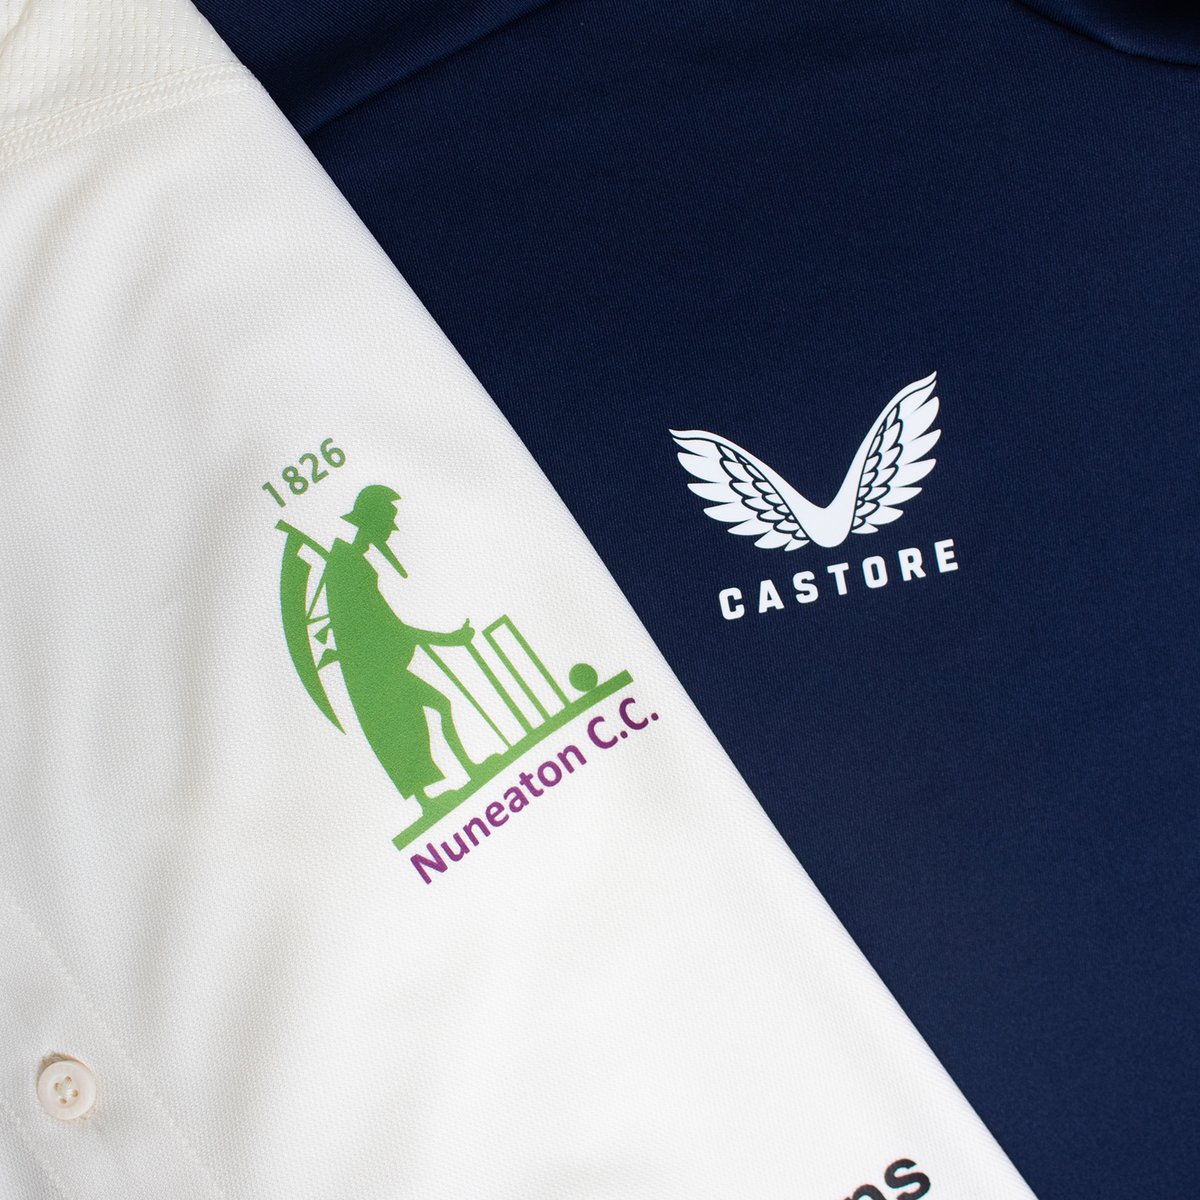 Stunning new Castore ranges for the Warwickshire based @NuneatonCC😍

Brand new items through production, leaving the building and on the way to customers🚛

Cricket season starts next month🙌🙌

#kitlockercricket #castore #castorecricket #betterneverstops #kitlocker #nuneatoncc